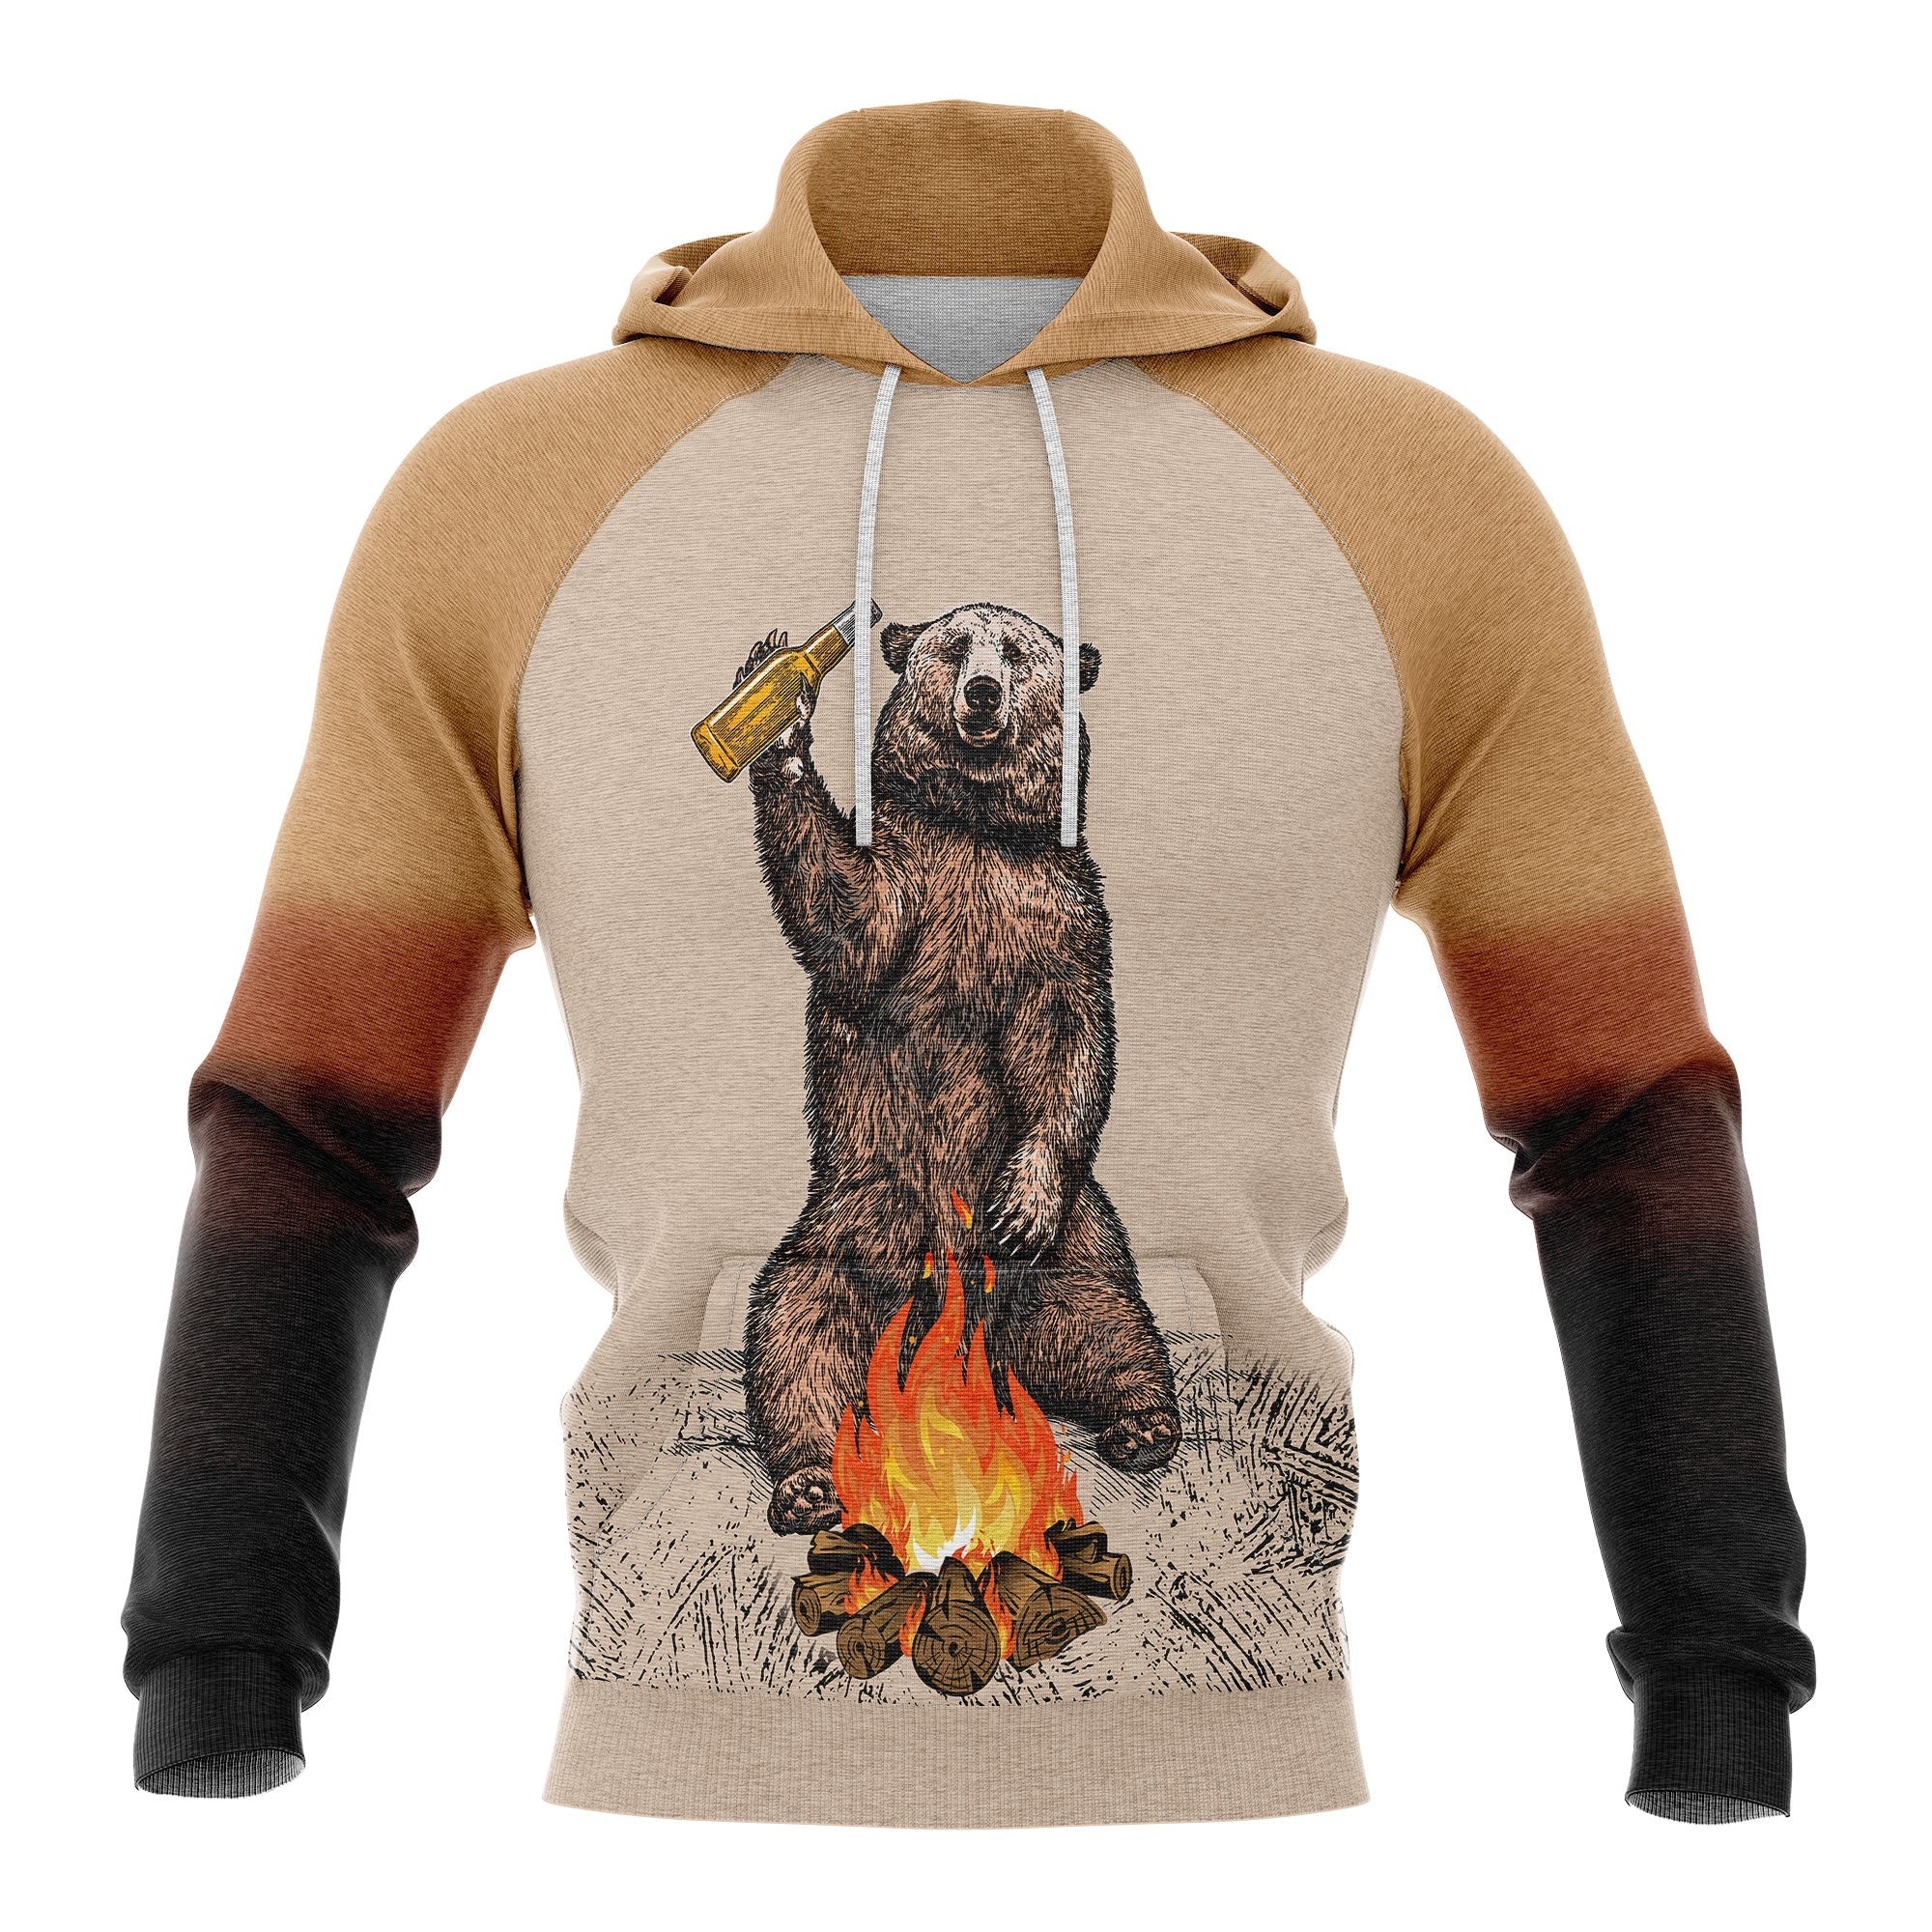 I Hate People Bear And Camping Lover Hoodie For Men And Women